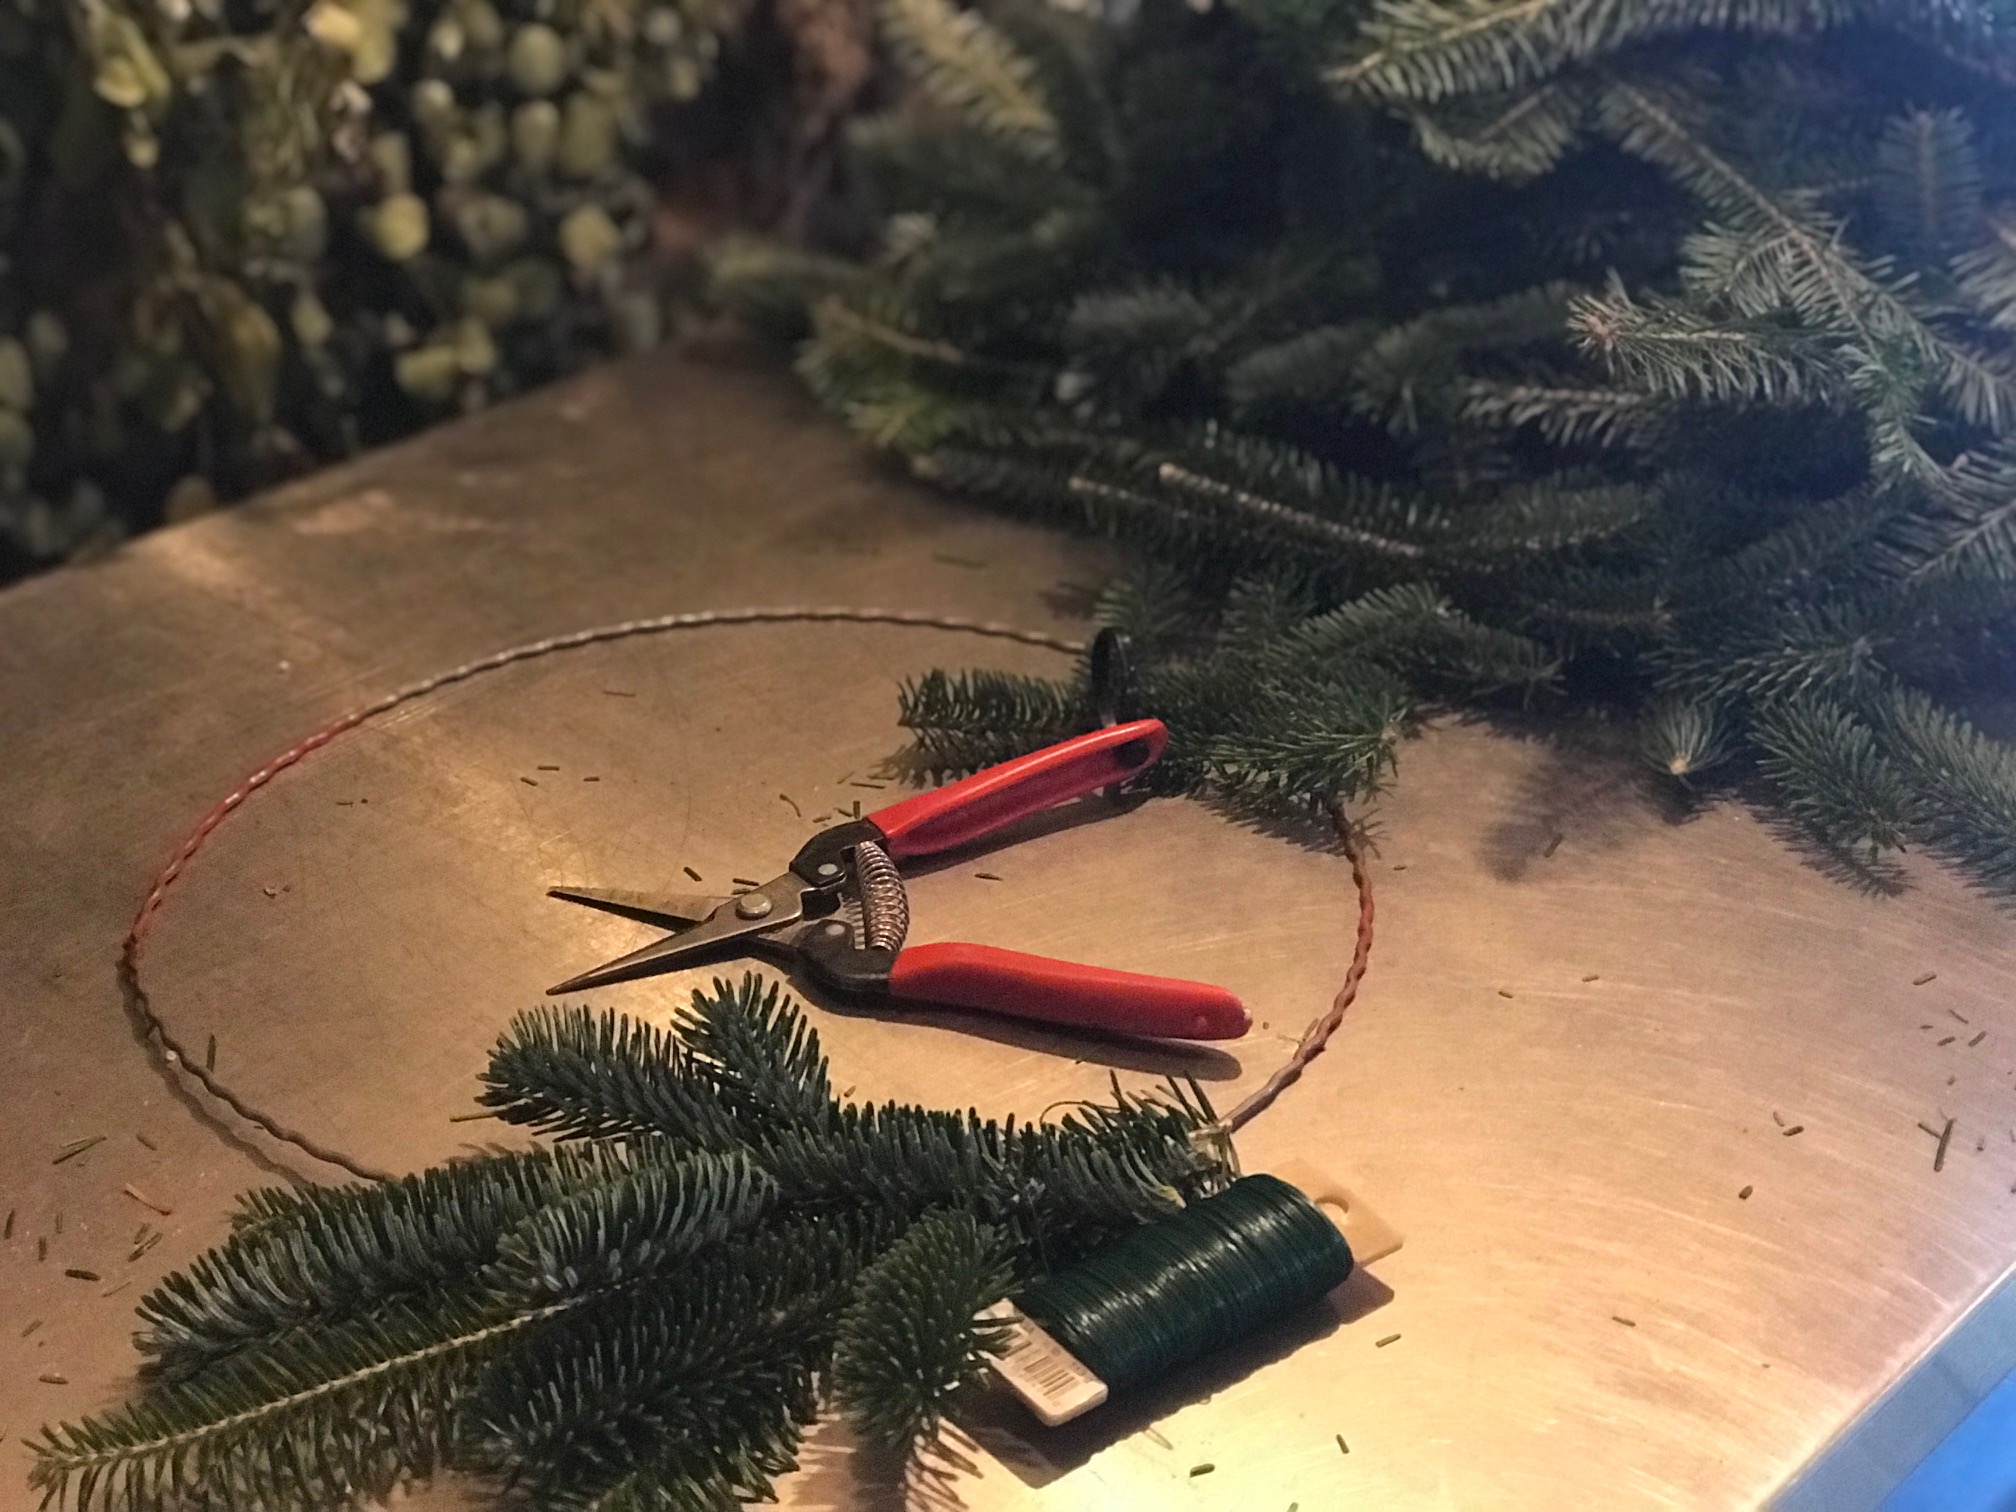 snips, wire and ring; the tools for a wreath workshop